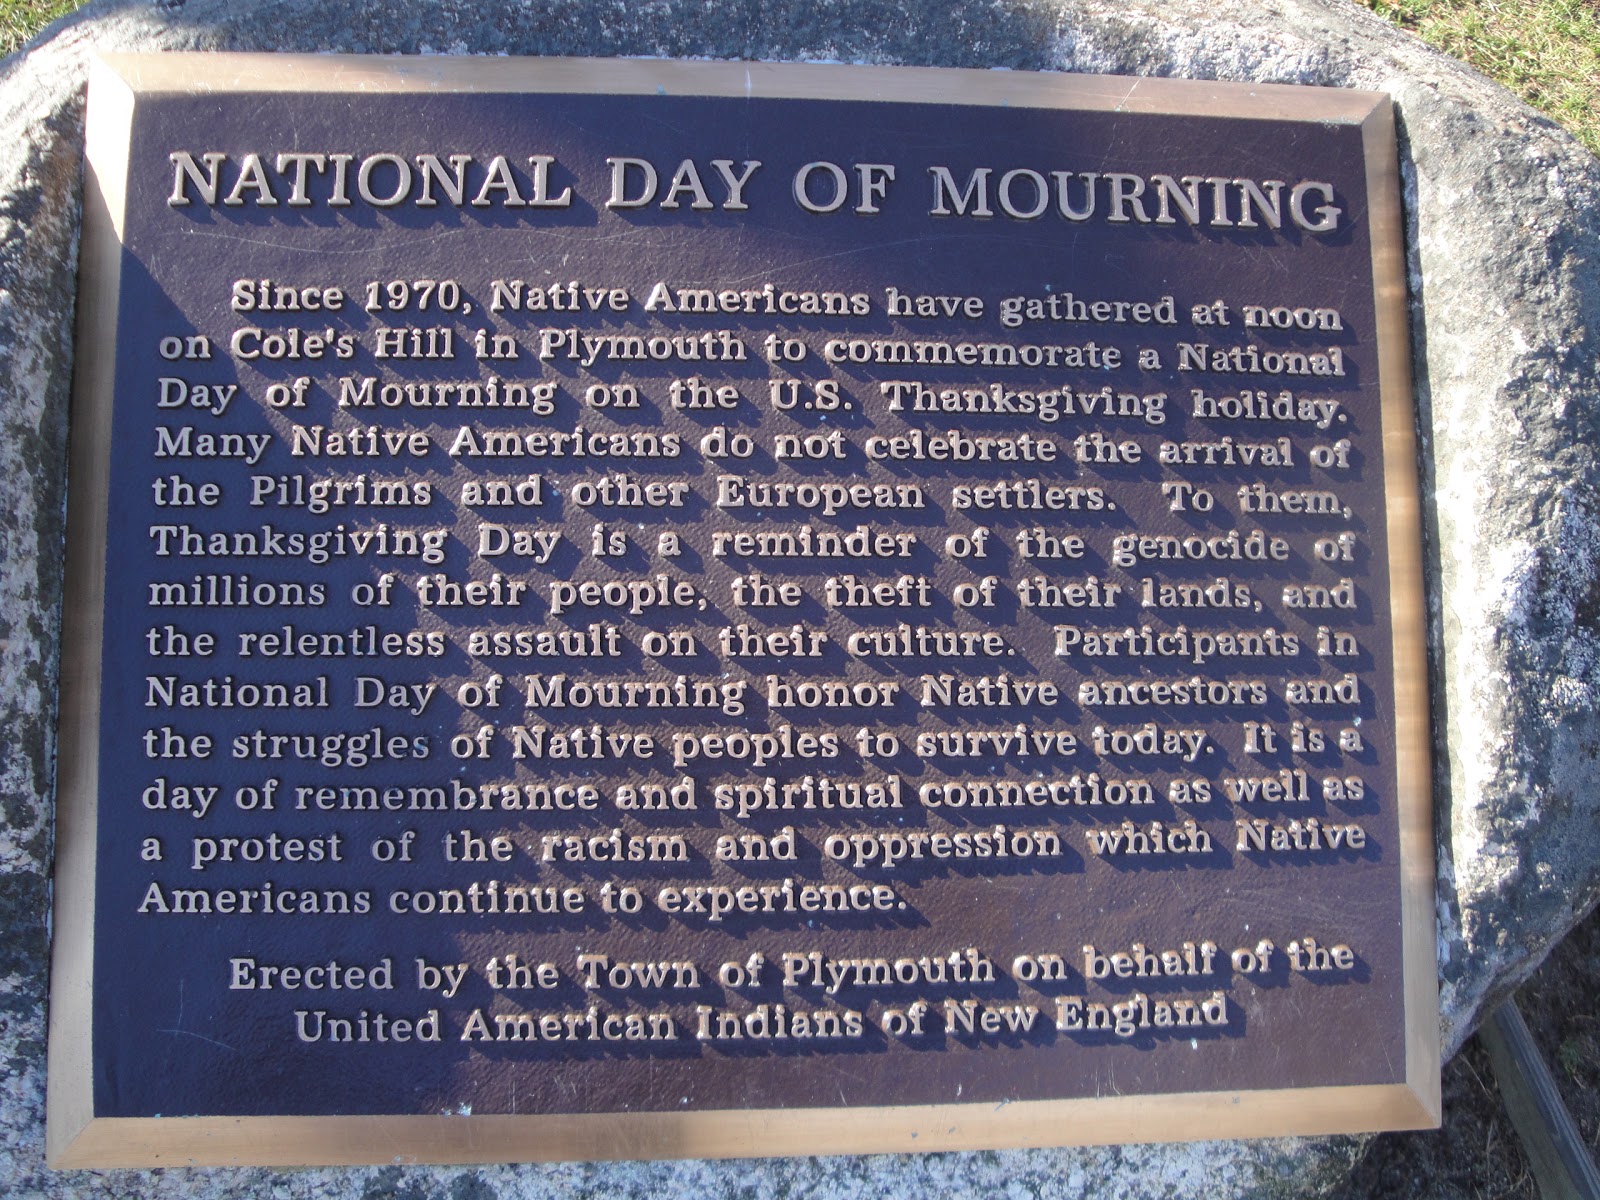 native american national day of mourning - National Day Of Mourning Since 1970, Native Americans have gathered at noon on Cole's Hill in Plymouth to commemorate a National Day of Mourning on the U.S. Thanksgiving holiday Many Native Americans do not celeb